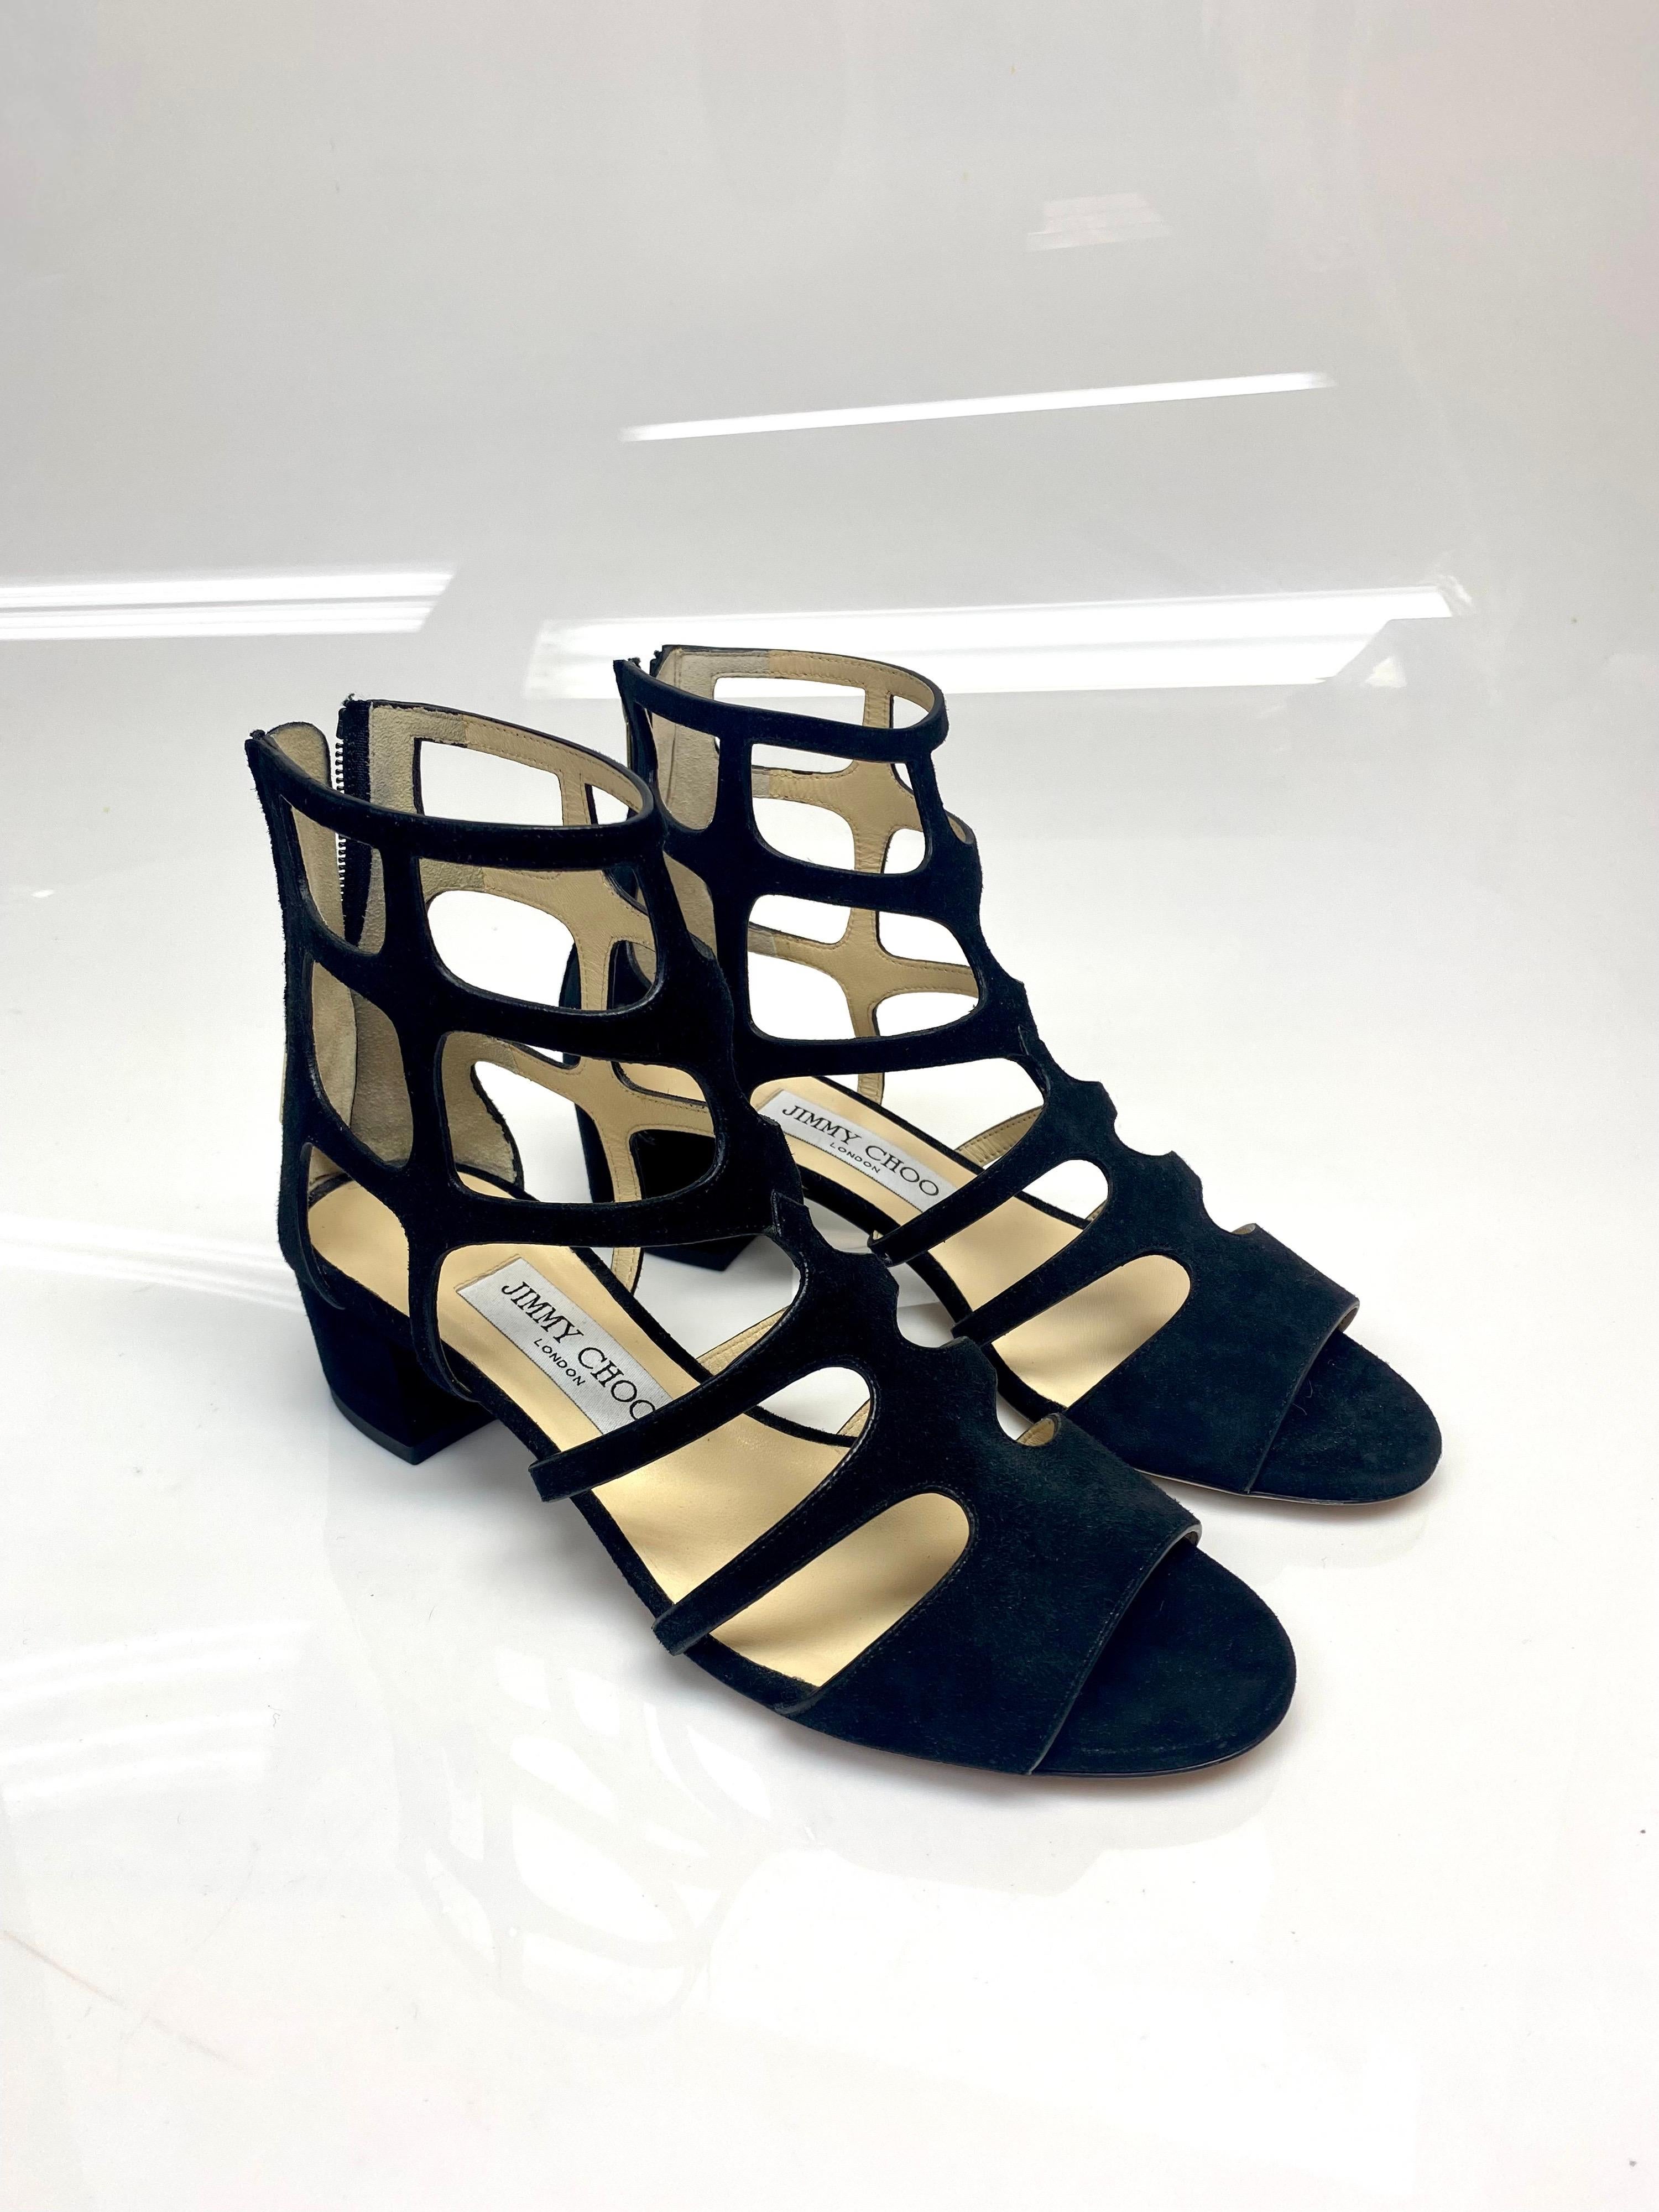 Jimmy Choo Black Gladiator Sandals Shoes Size 36.5. From the House of Jimmy Choo, here comes this simply splendid pair of sandals. Made from black suede in a gladiator style, which grants the pair a very unique look. This pair comes with a peep toe